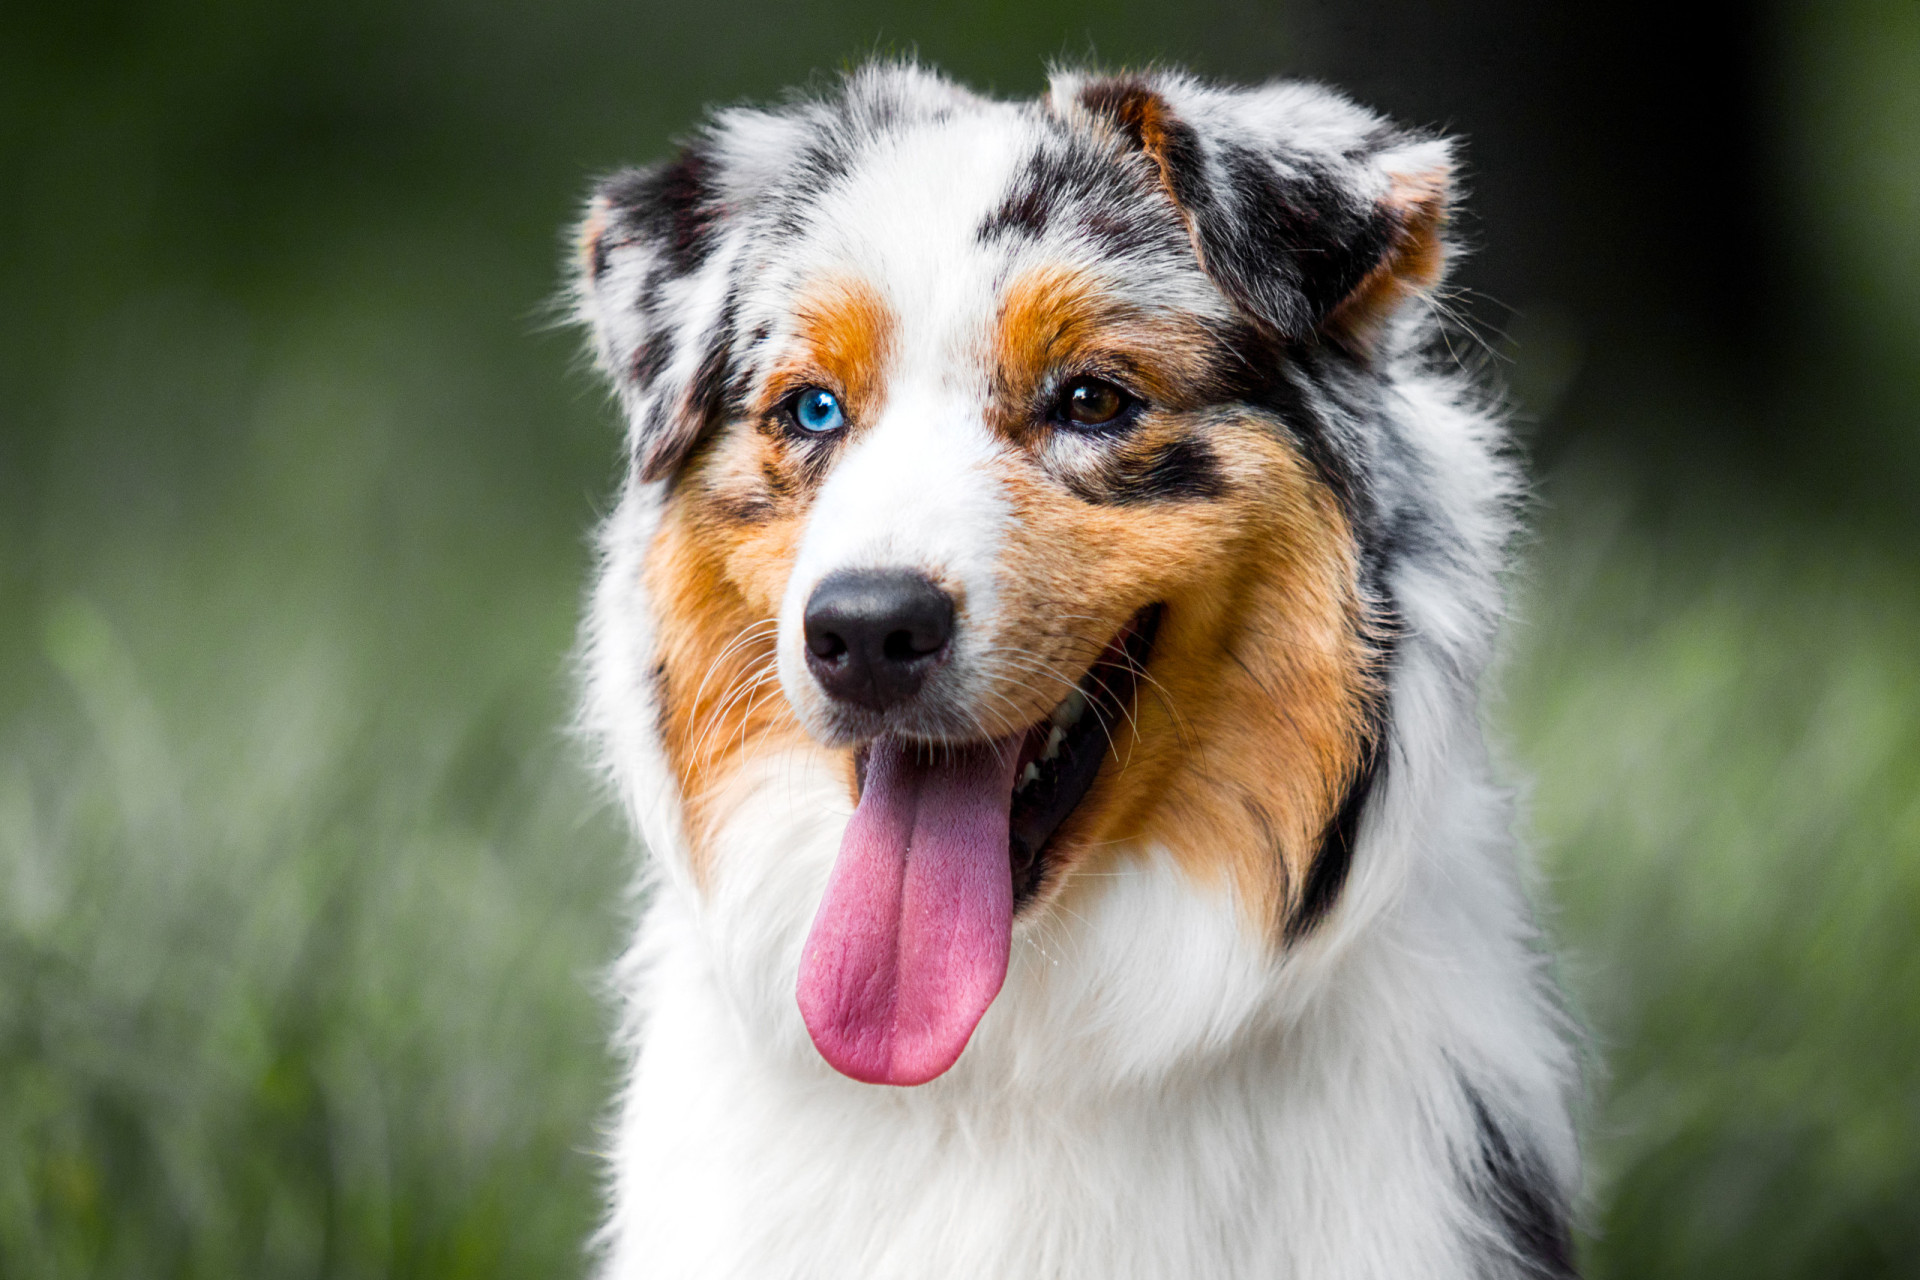 <p>Often called "Aussies," these pups are extremely energetic and require daily exercise as well as weekly brushing. Their average life expectancy is 15 years.</p><p><a href="https://www.msn.com/en-us/community/channel/vid-7xx8mnucu55yw63we9va2gwr7uihbxwc68fxqp25x6tg4ftibpra?cvid=94631541bc0f4f89bfd59158d696ad7e">Follow us and access great exclusive content every day</a></p>